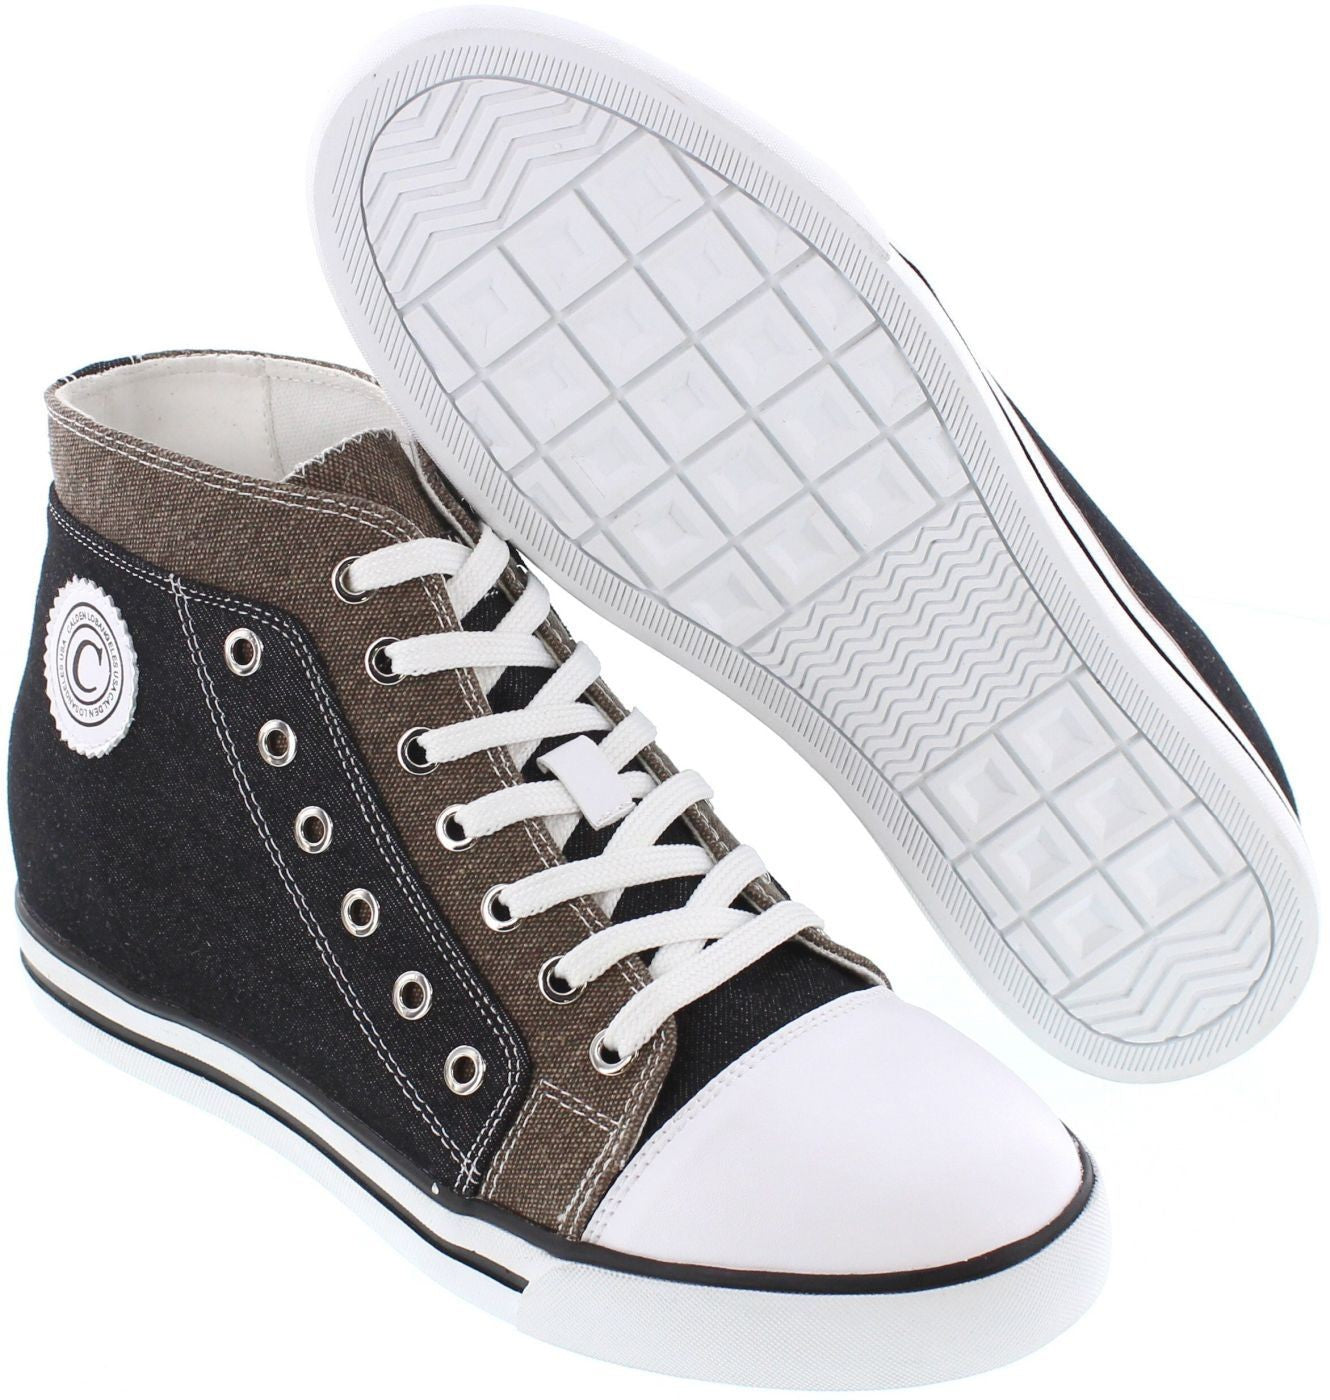 Elevator shoes height increase CALDEN - K882898 - 3 Inches Taller (Black and Grey)